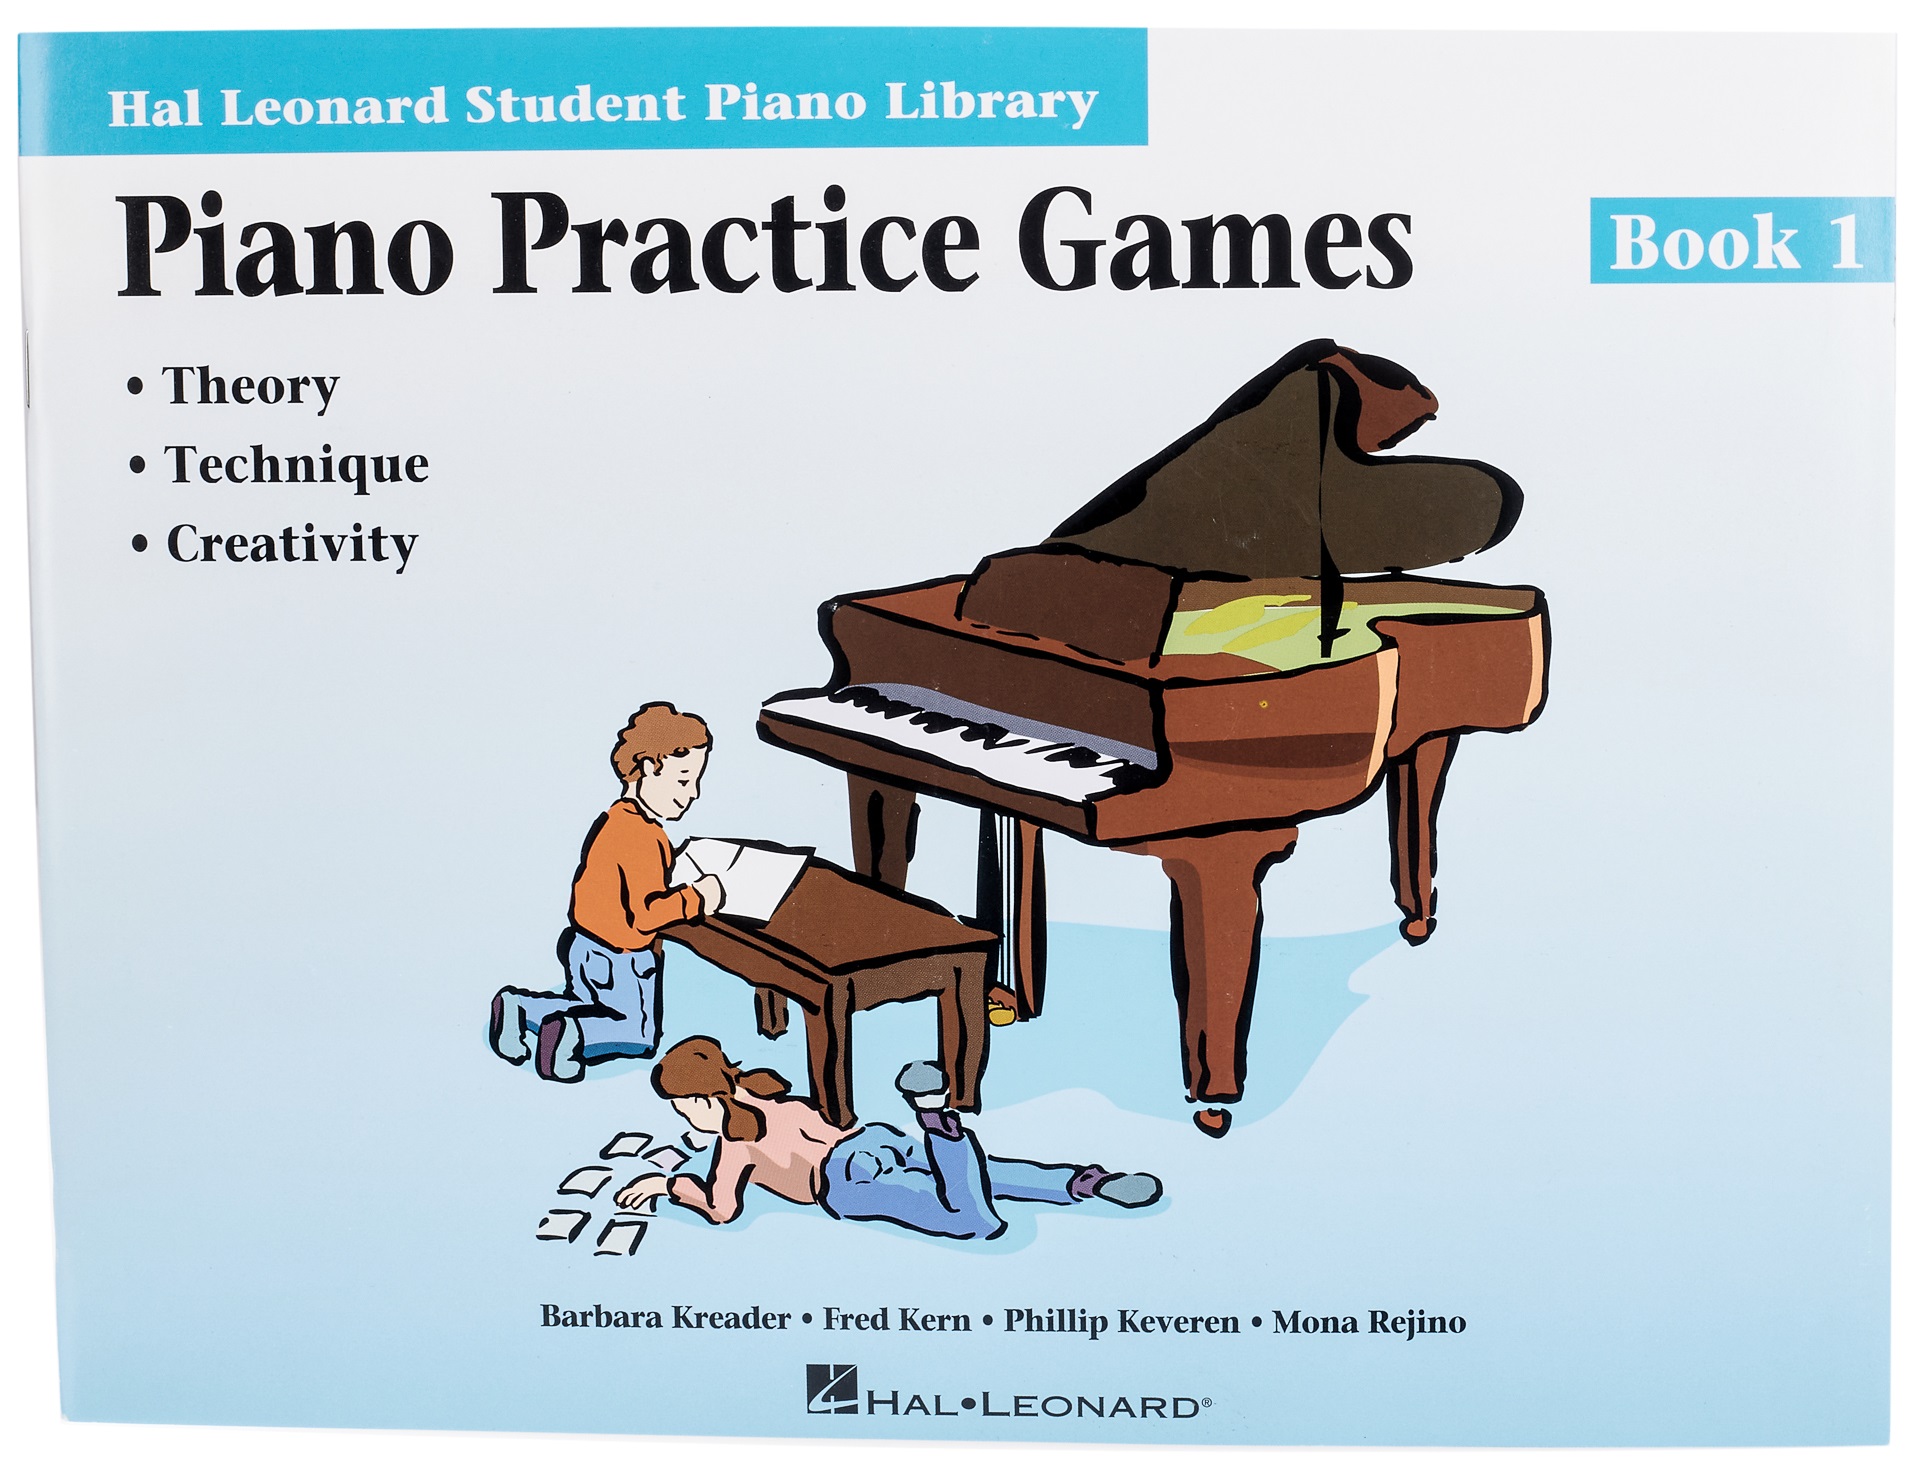 MS Hal Leonard Student Piano Library: Piano Practice Games Book 1